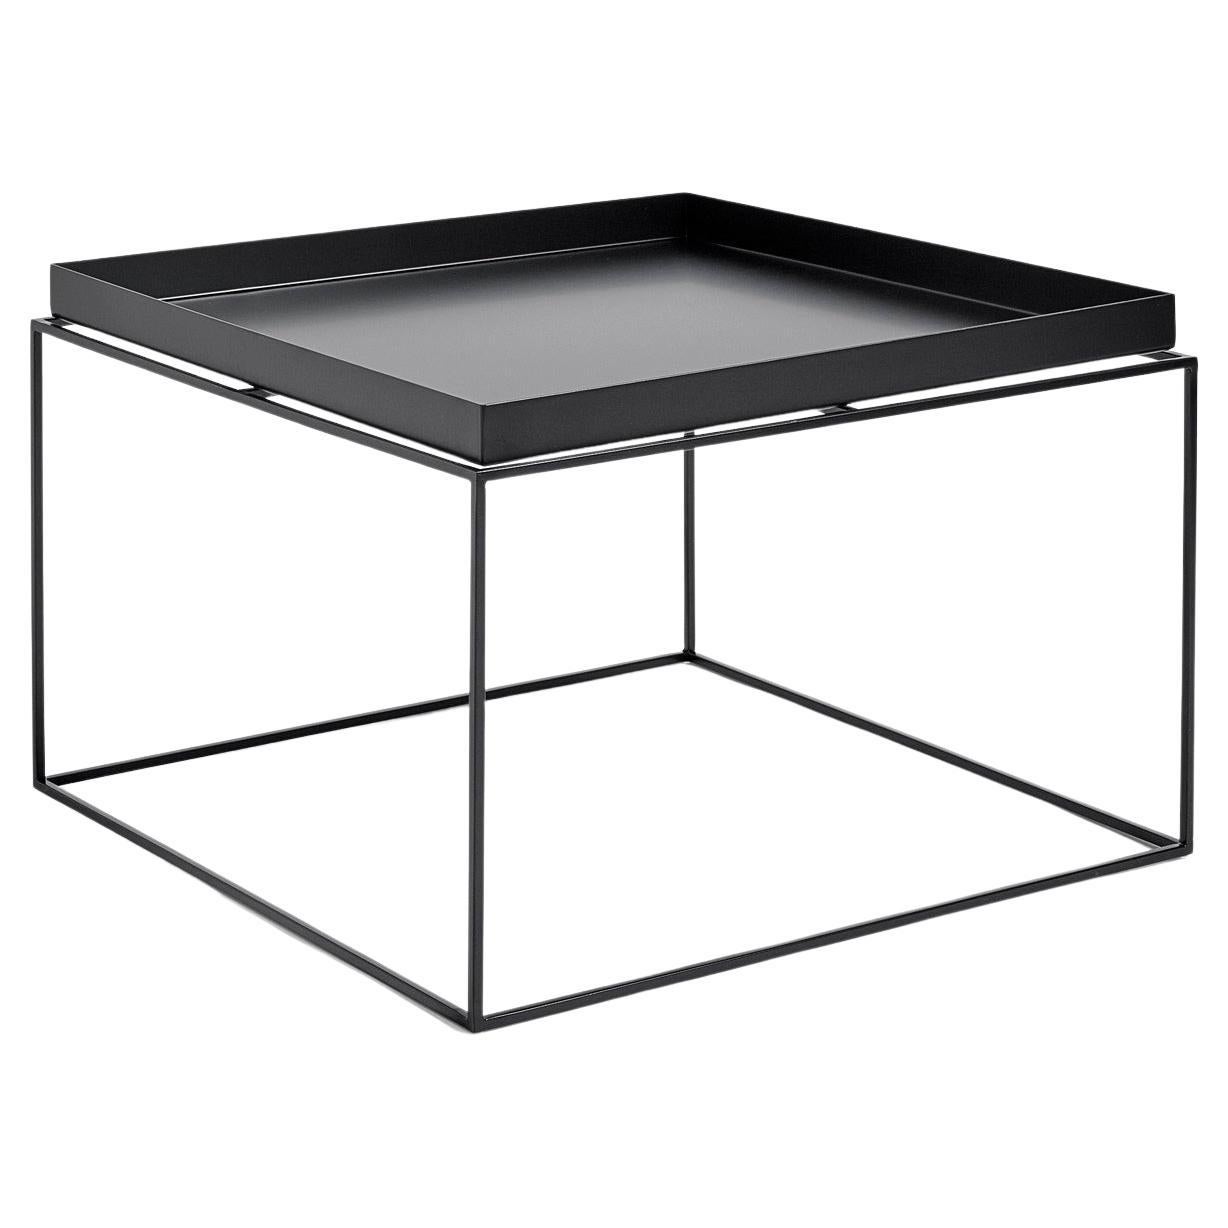 Tray Coffee Table - Black Powder Coated Steel - by Hay For Sale